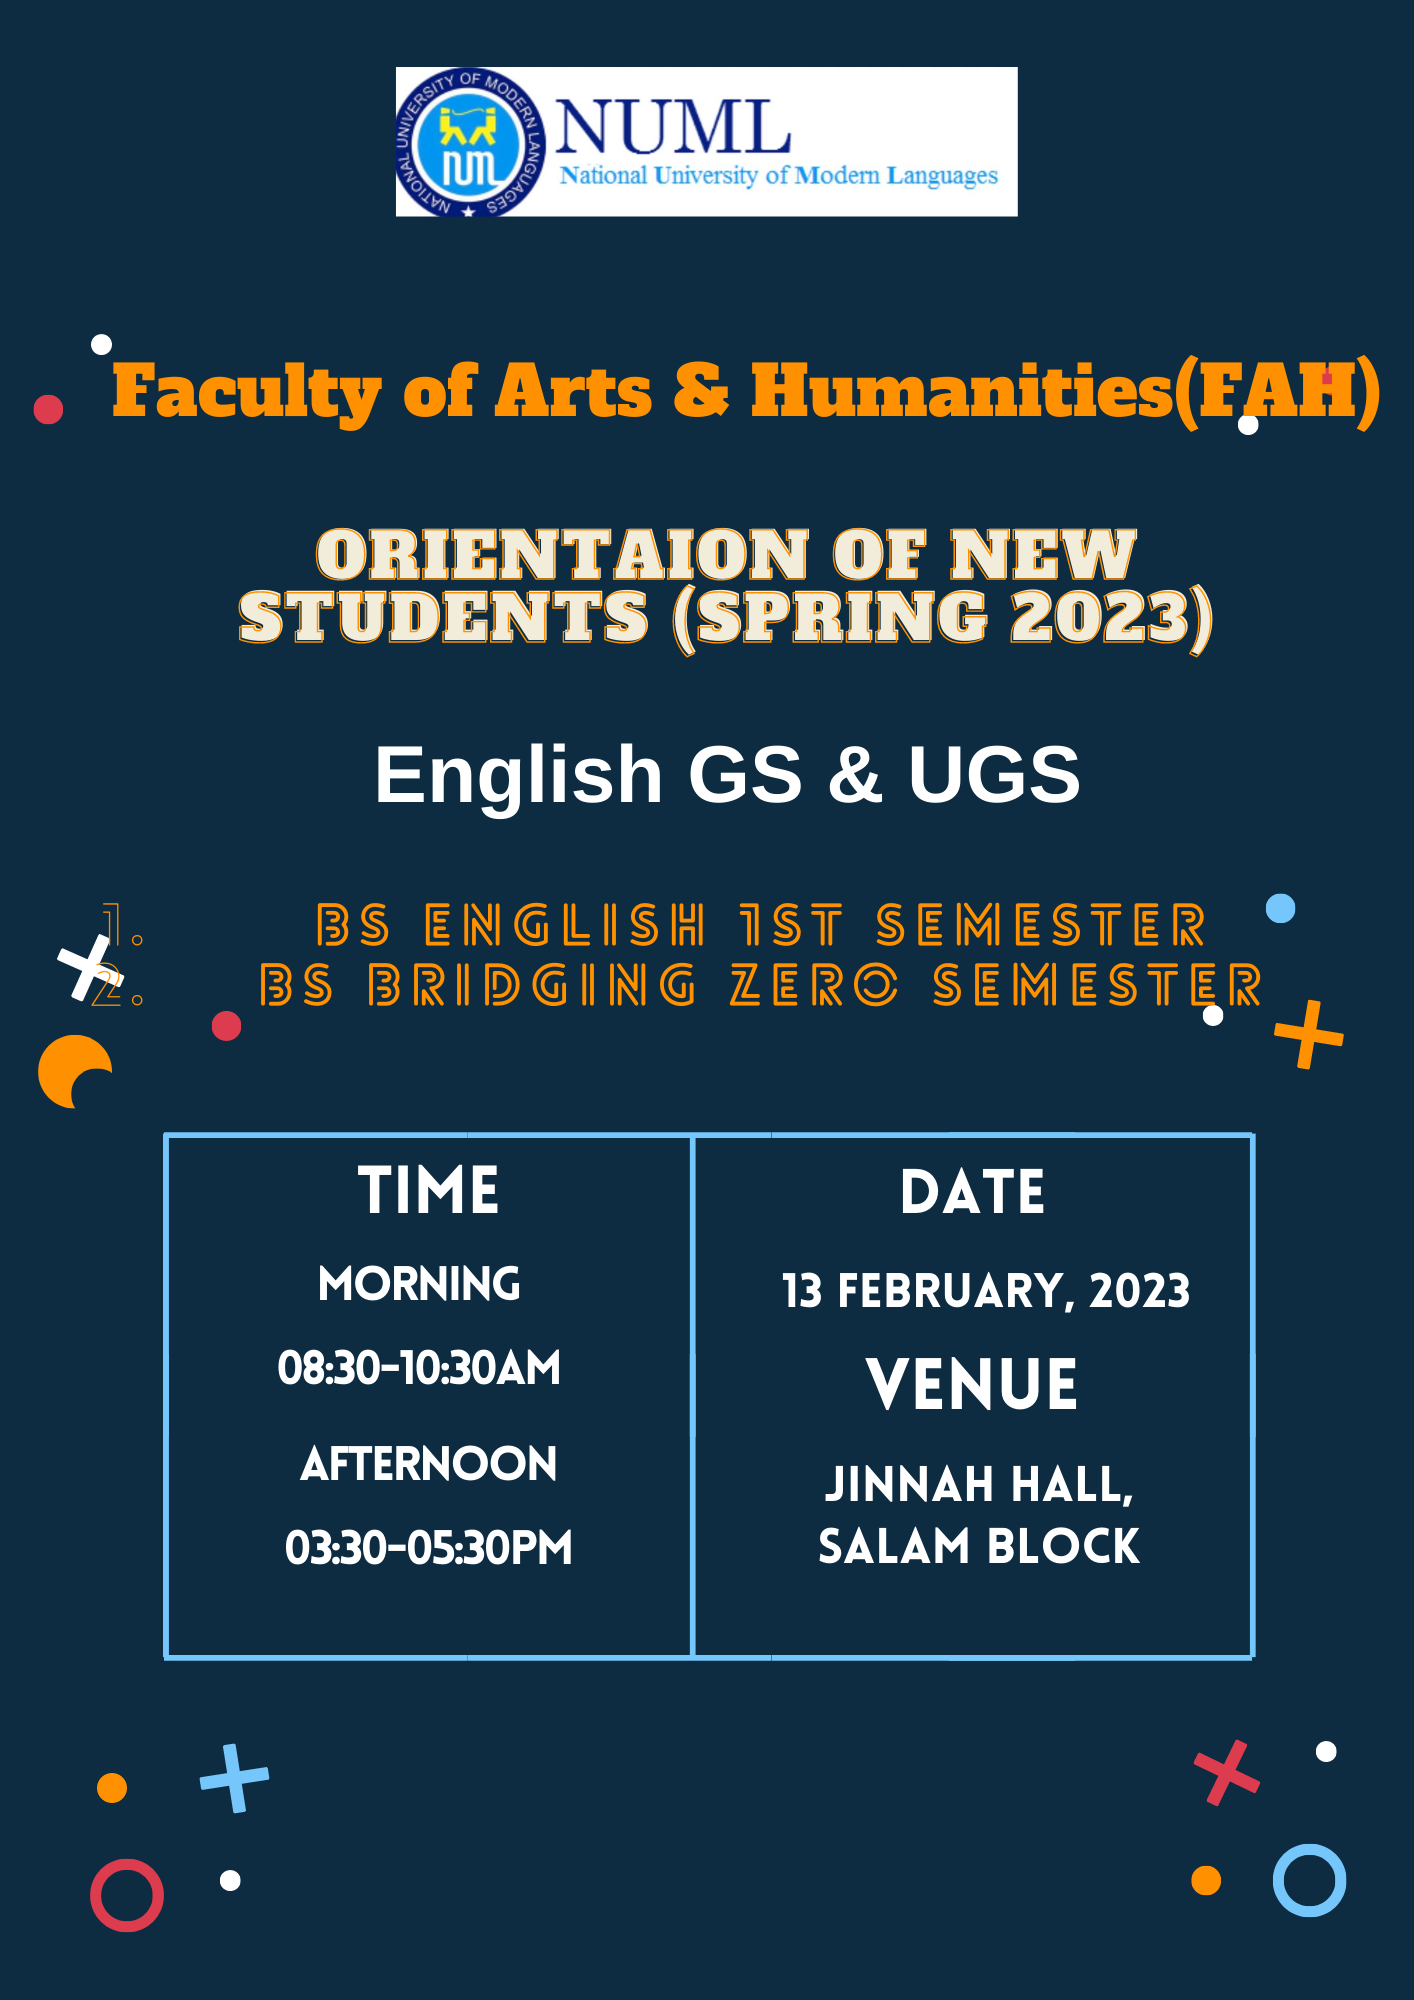 Orientation of BS English students (UGS)